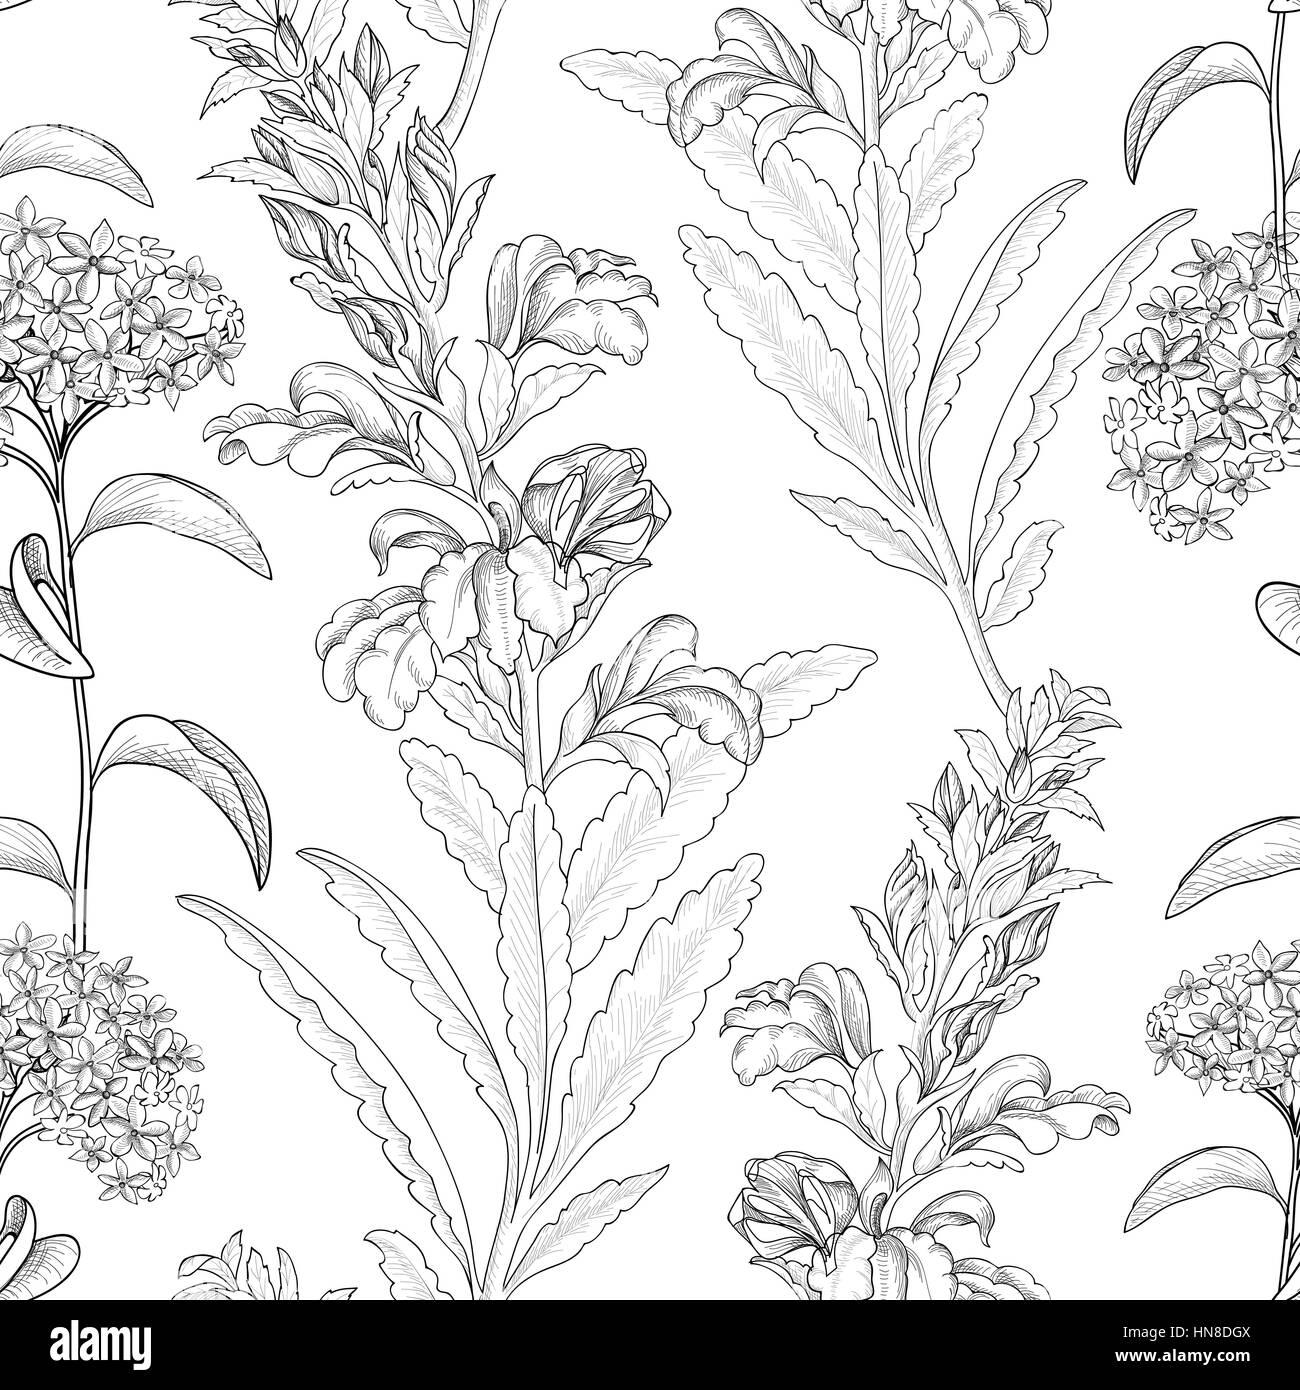 Floral seamless pattern. Flower background. Floral tile ornamental texture with flowers. Spring flourish garden Stock Vector